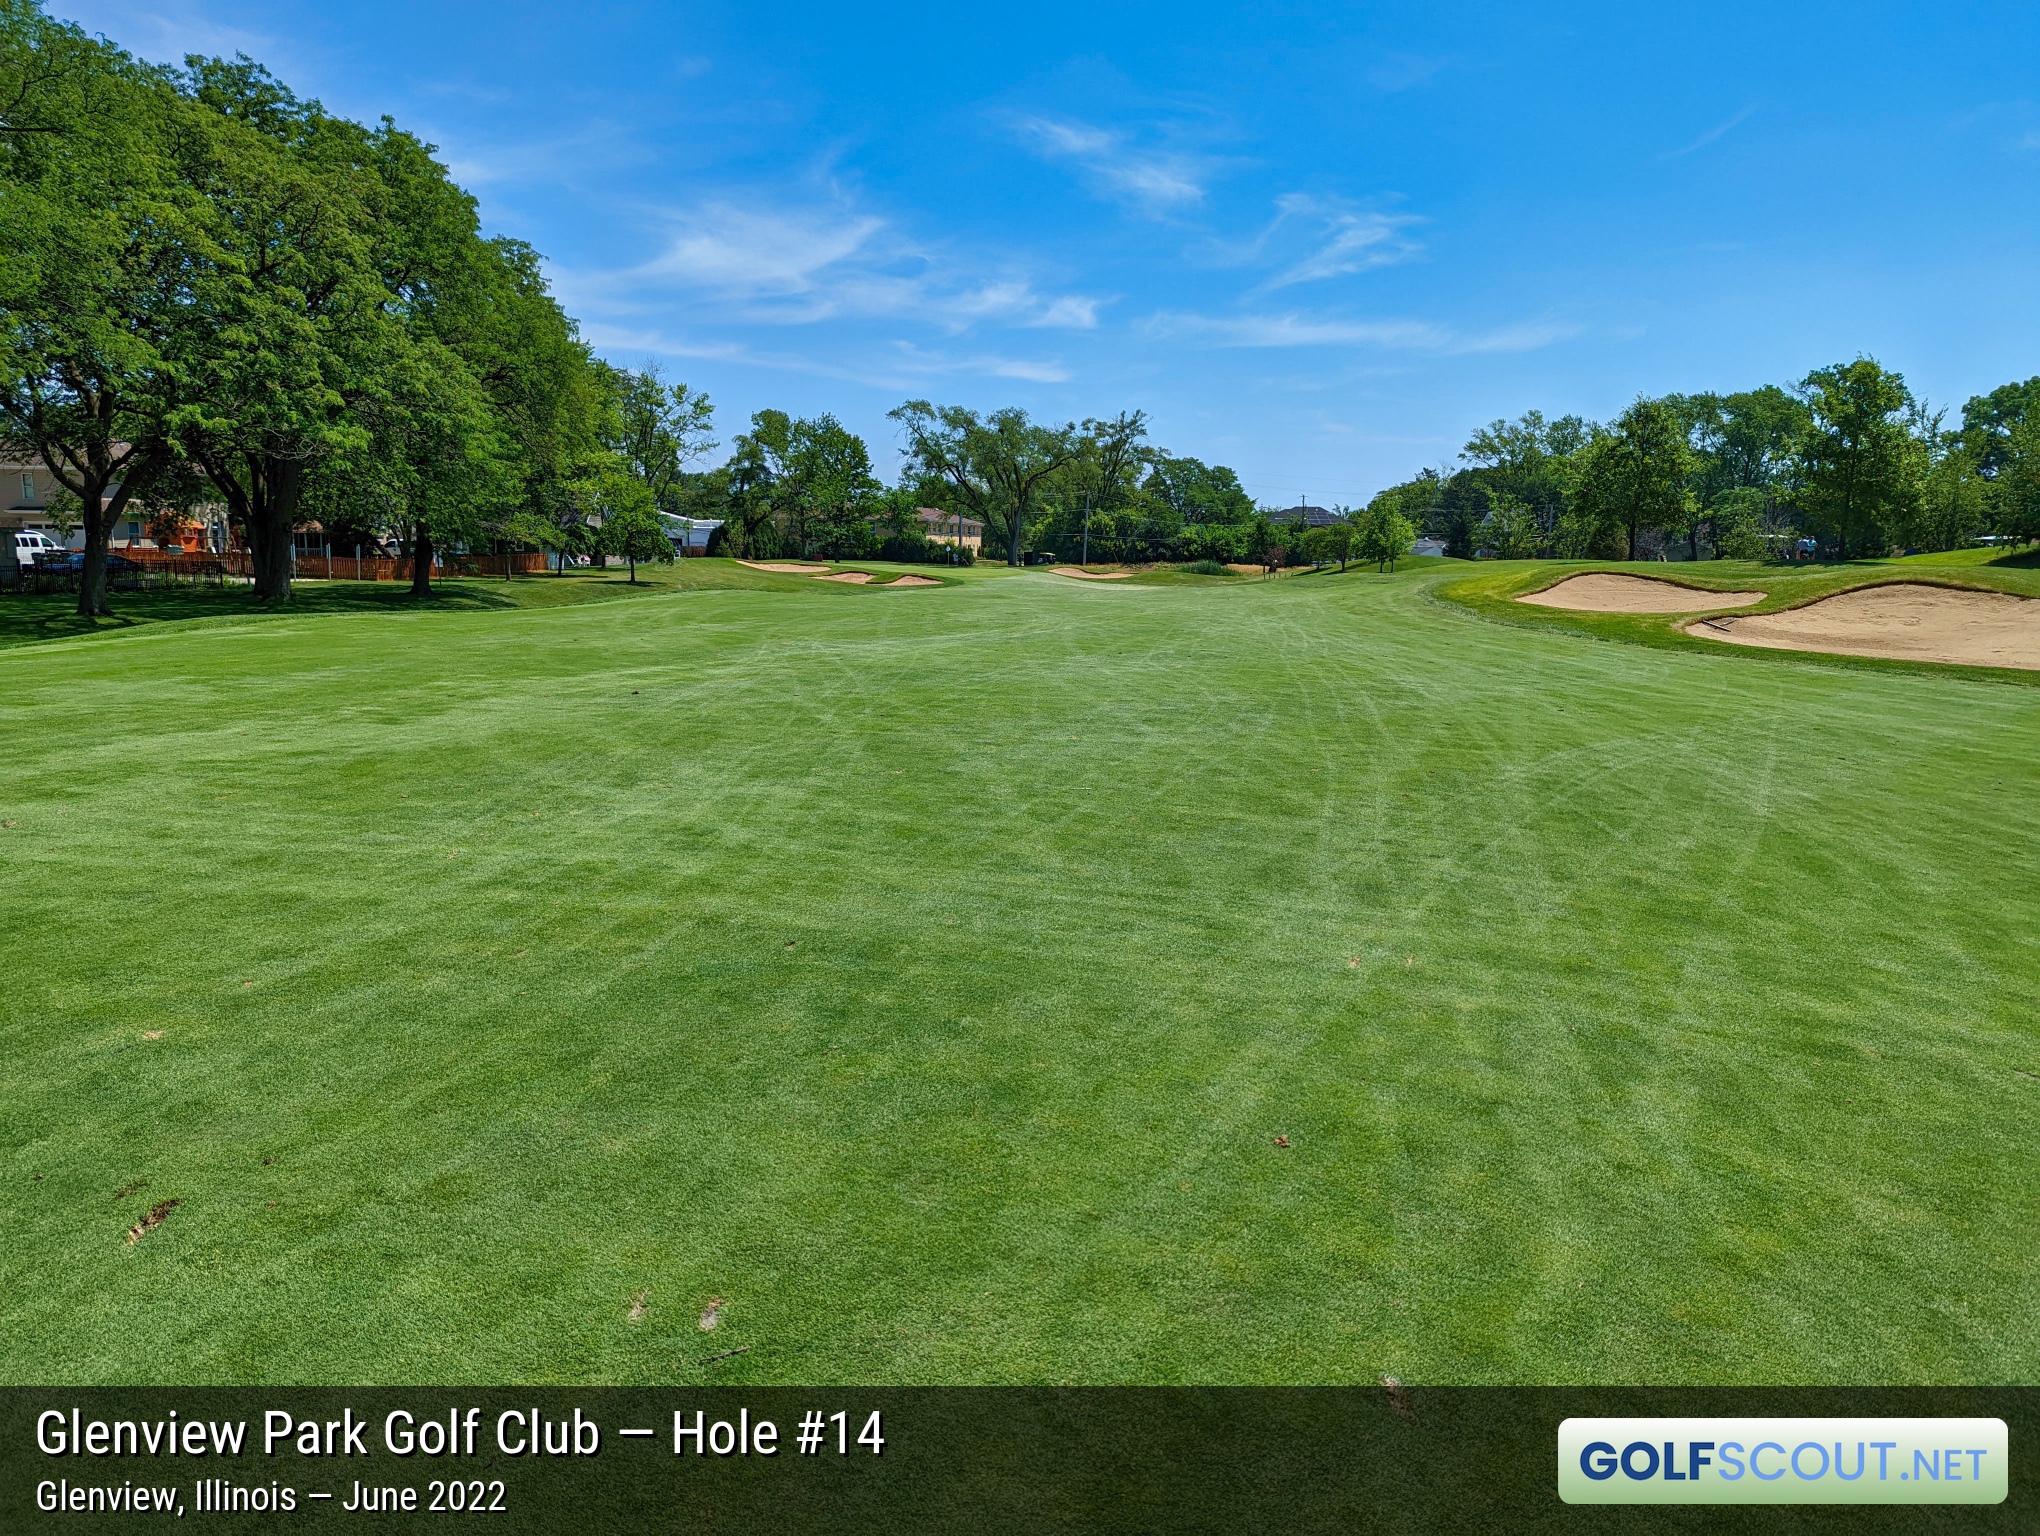 Photo of hole #14 at Glenview Park Golf Club in Glenview, Illinois. 